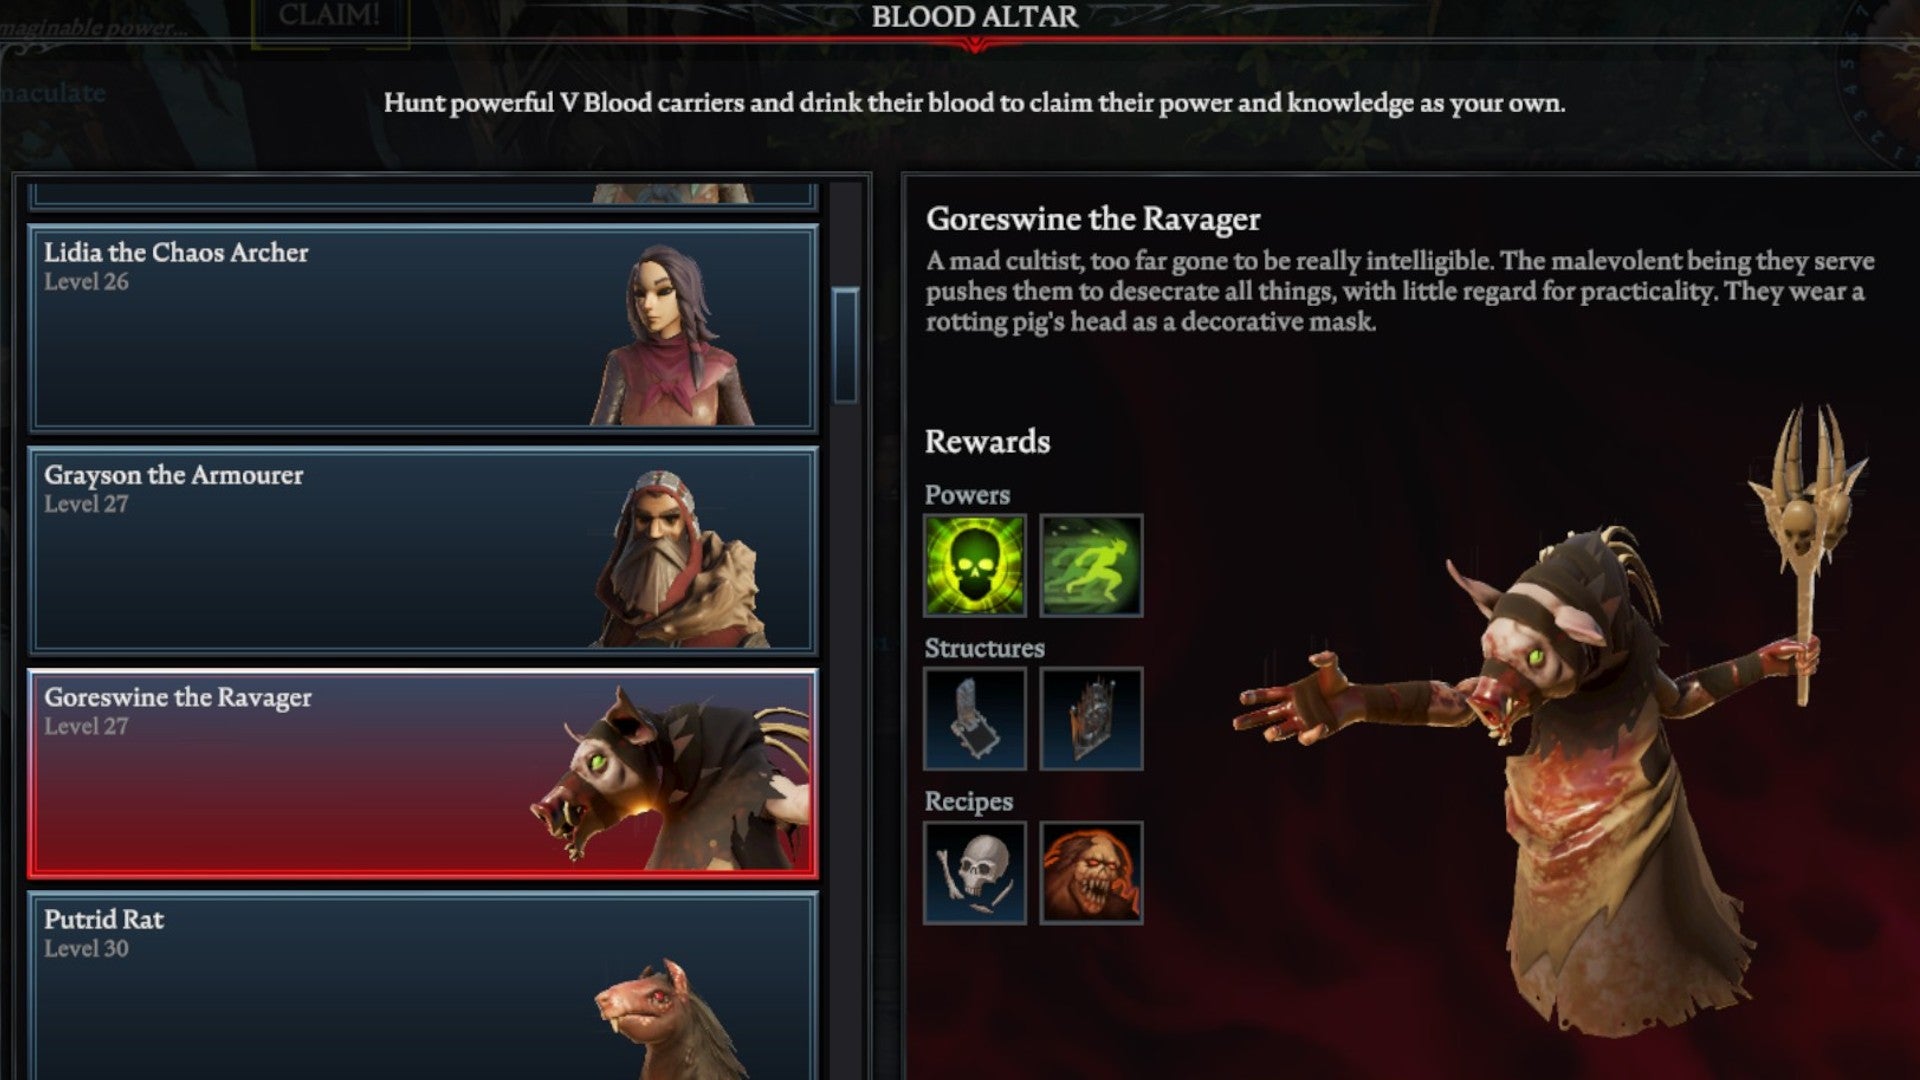 V Rising Goreswine the Ravager Blood Altar tracking page, showing an image of the cultist ravager wearing a pig head on the right and a list of bosses on the left